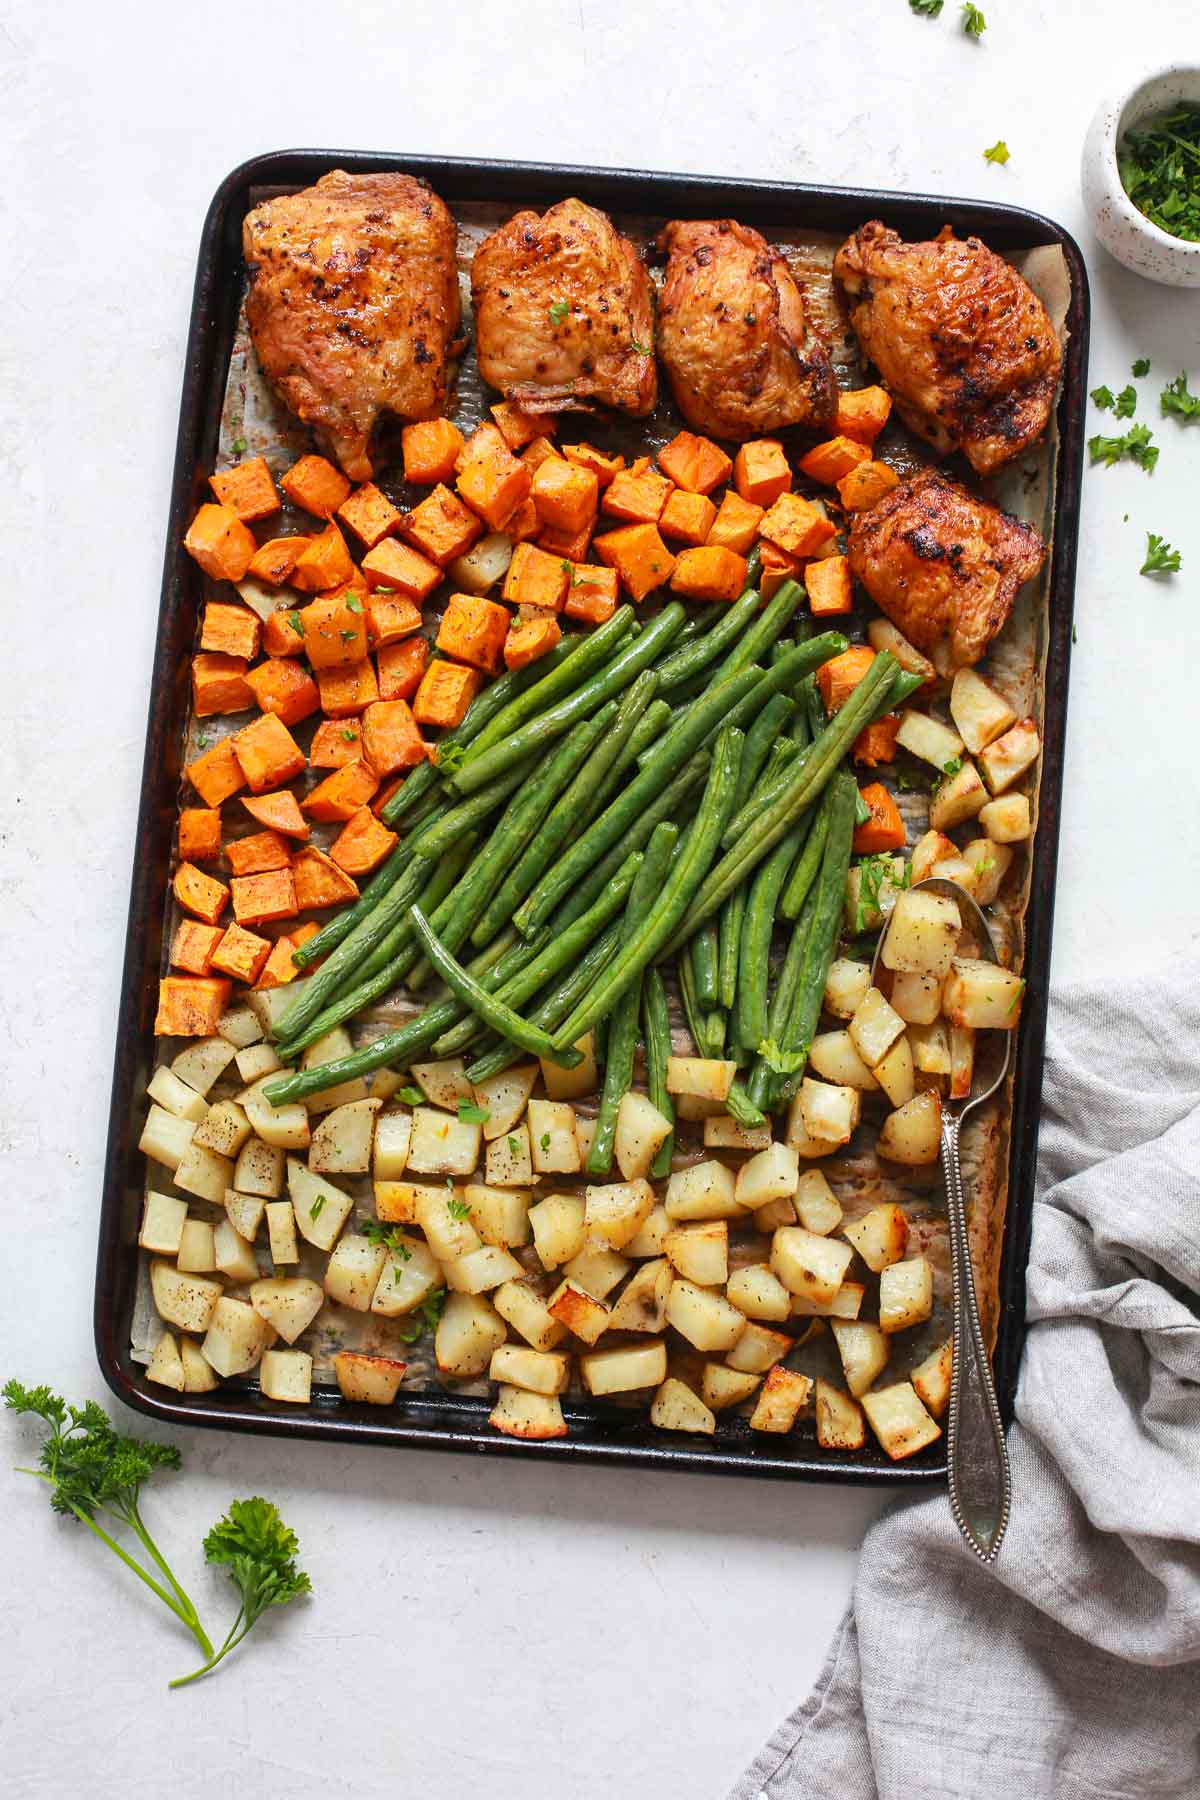 One-Pan Dinner Recipe - A sheet pan with chicken thighs, green beans, and potatoes.